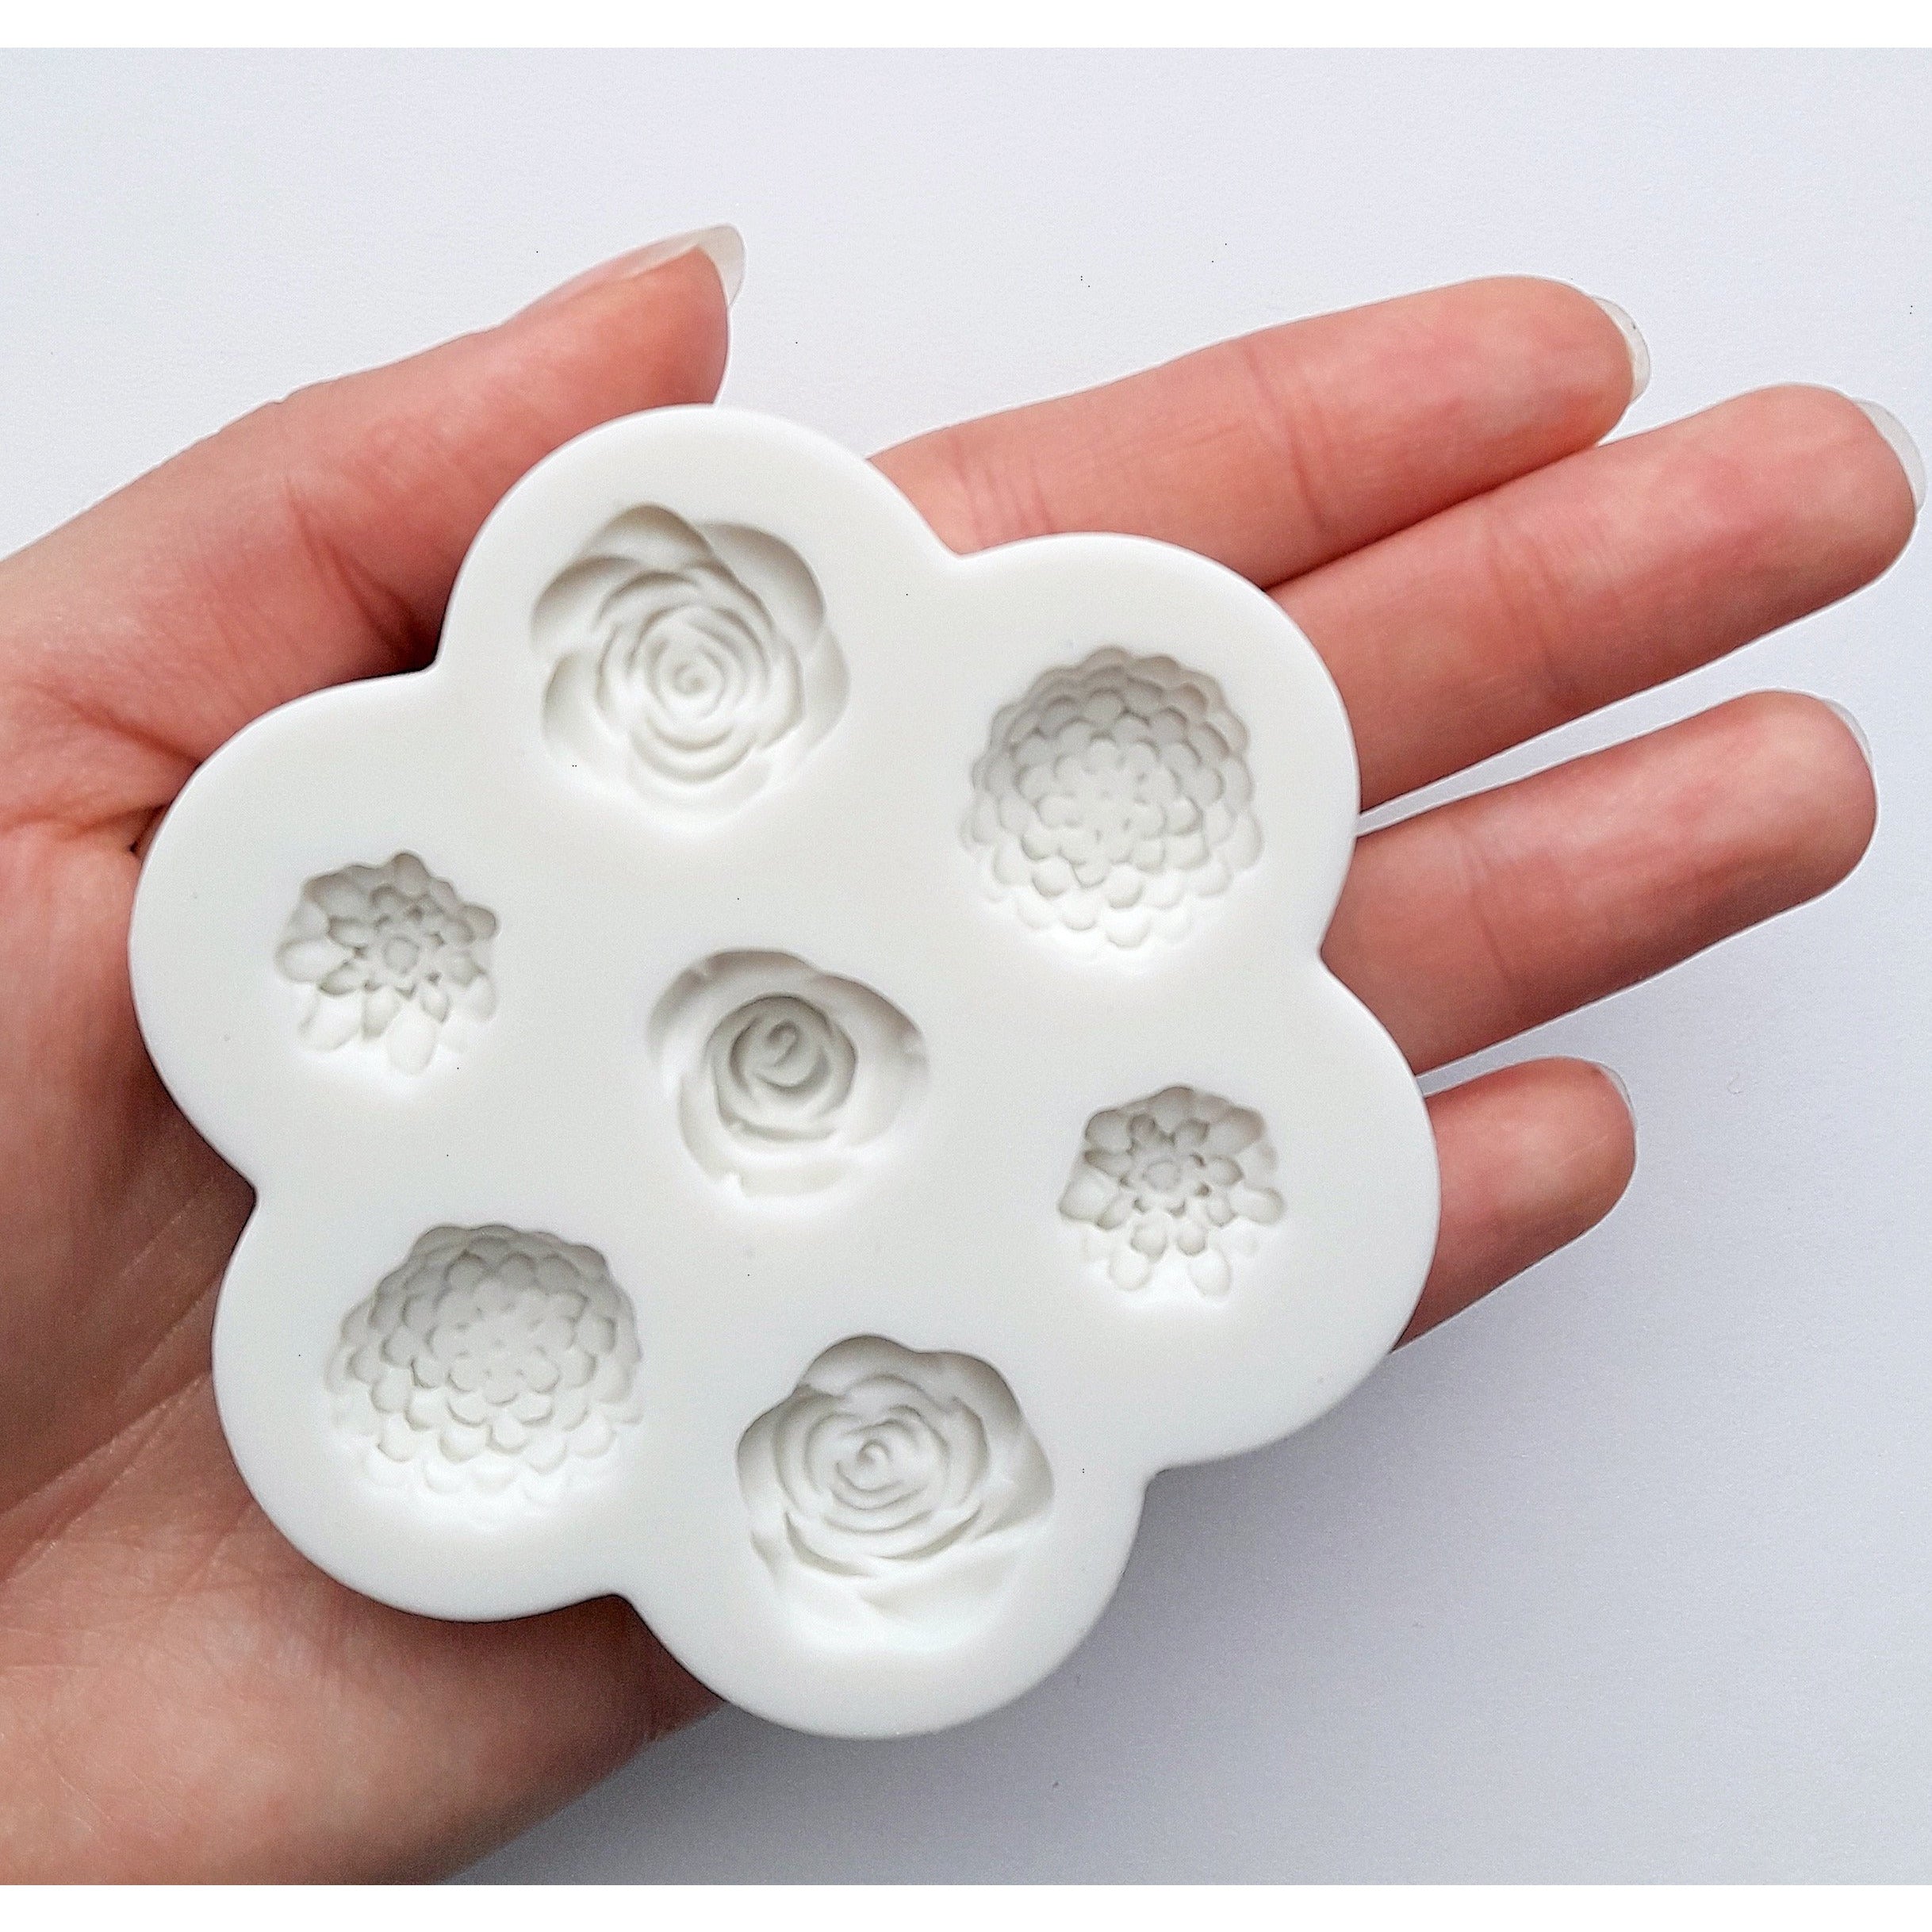 Mujiang Rose Flower Silicone Molds Daisy Fondant Mold Flower Orchid Cake  Decorating Molds Set Of 4